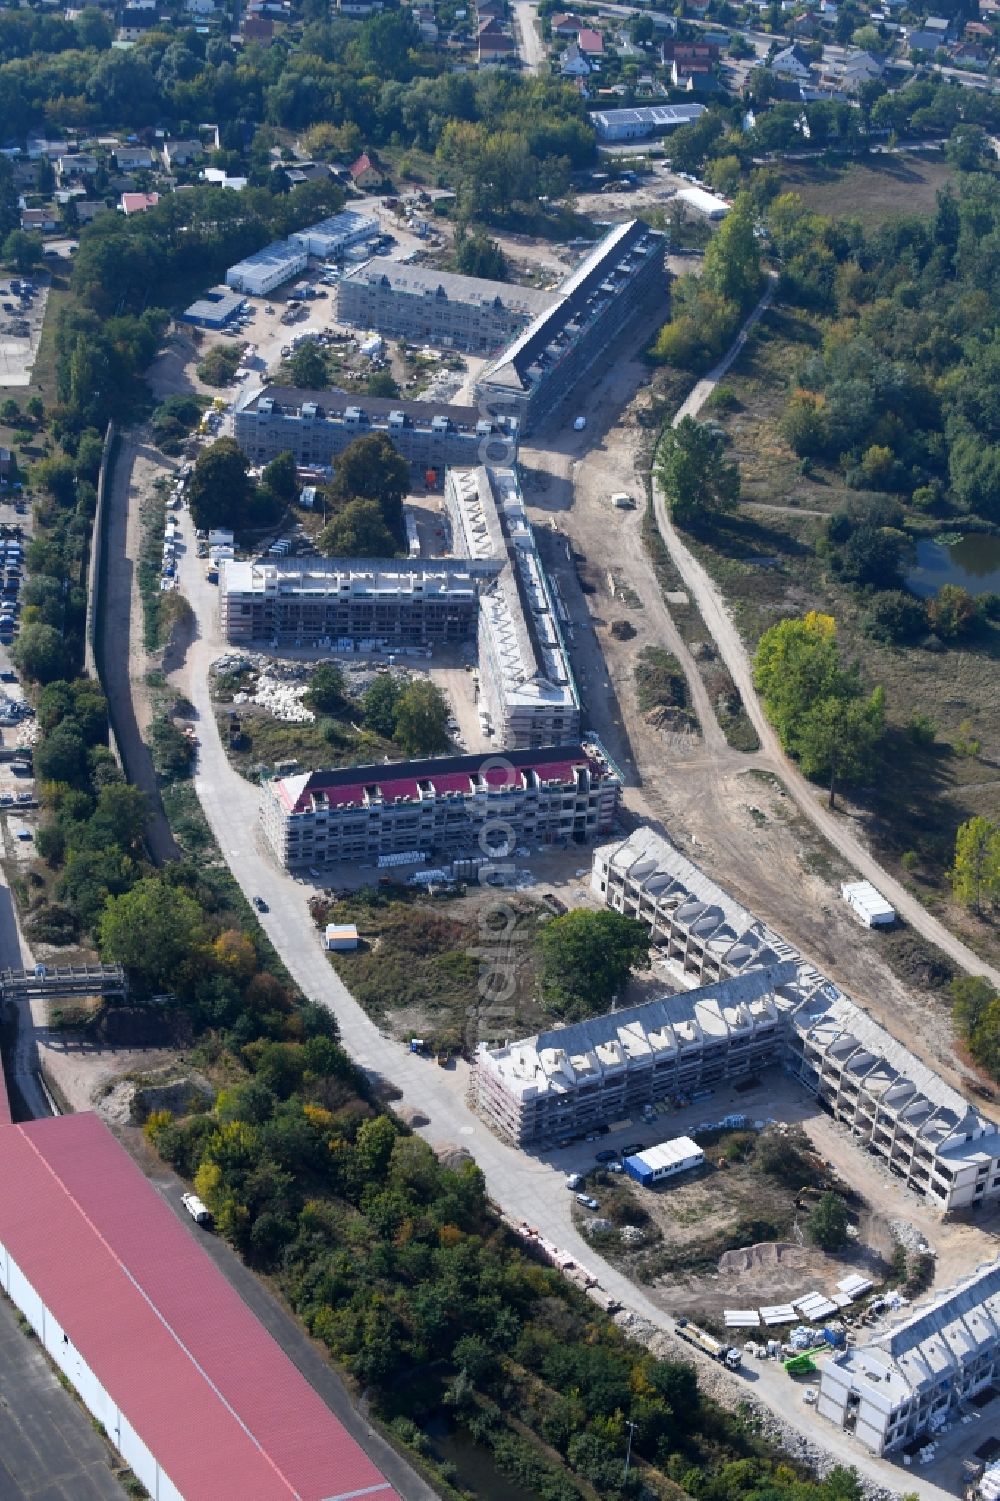 Aerial image Bernau - Construction site for the renovation and reconstruction of the building complex of the former military barracks redevelopment area Panke-Park on Schoenfelder Weg in Bernau in the state Brandenburg, Germany